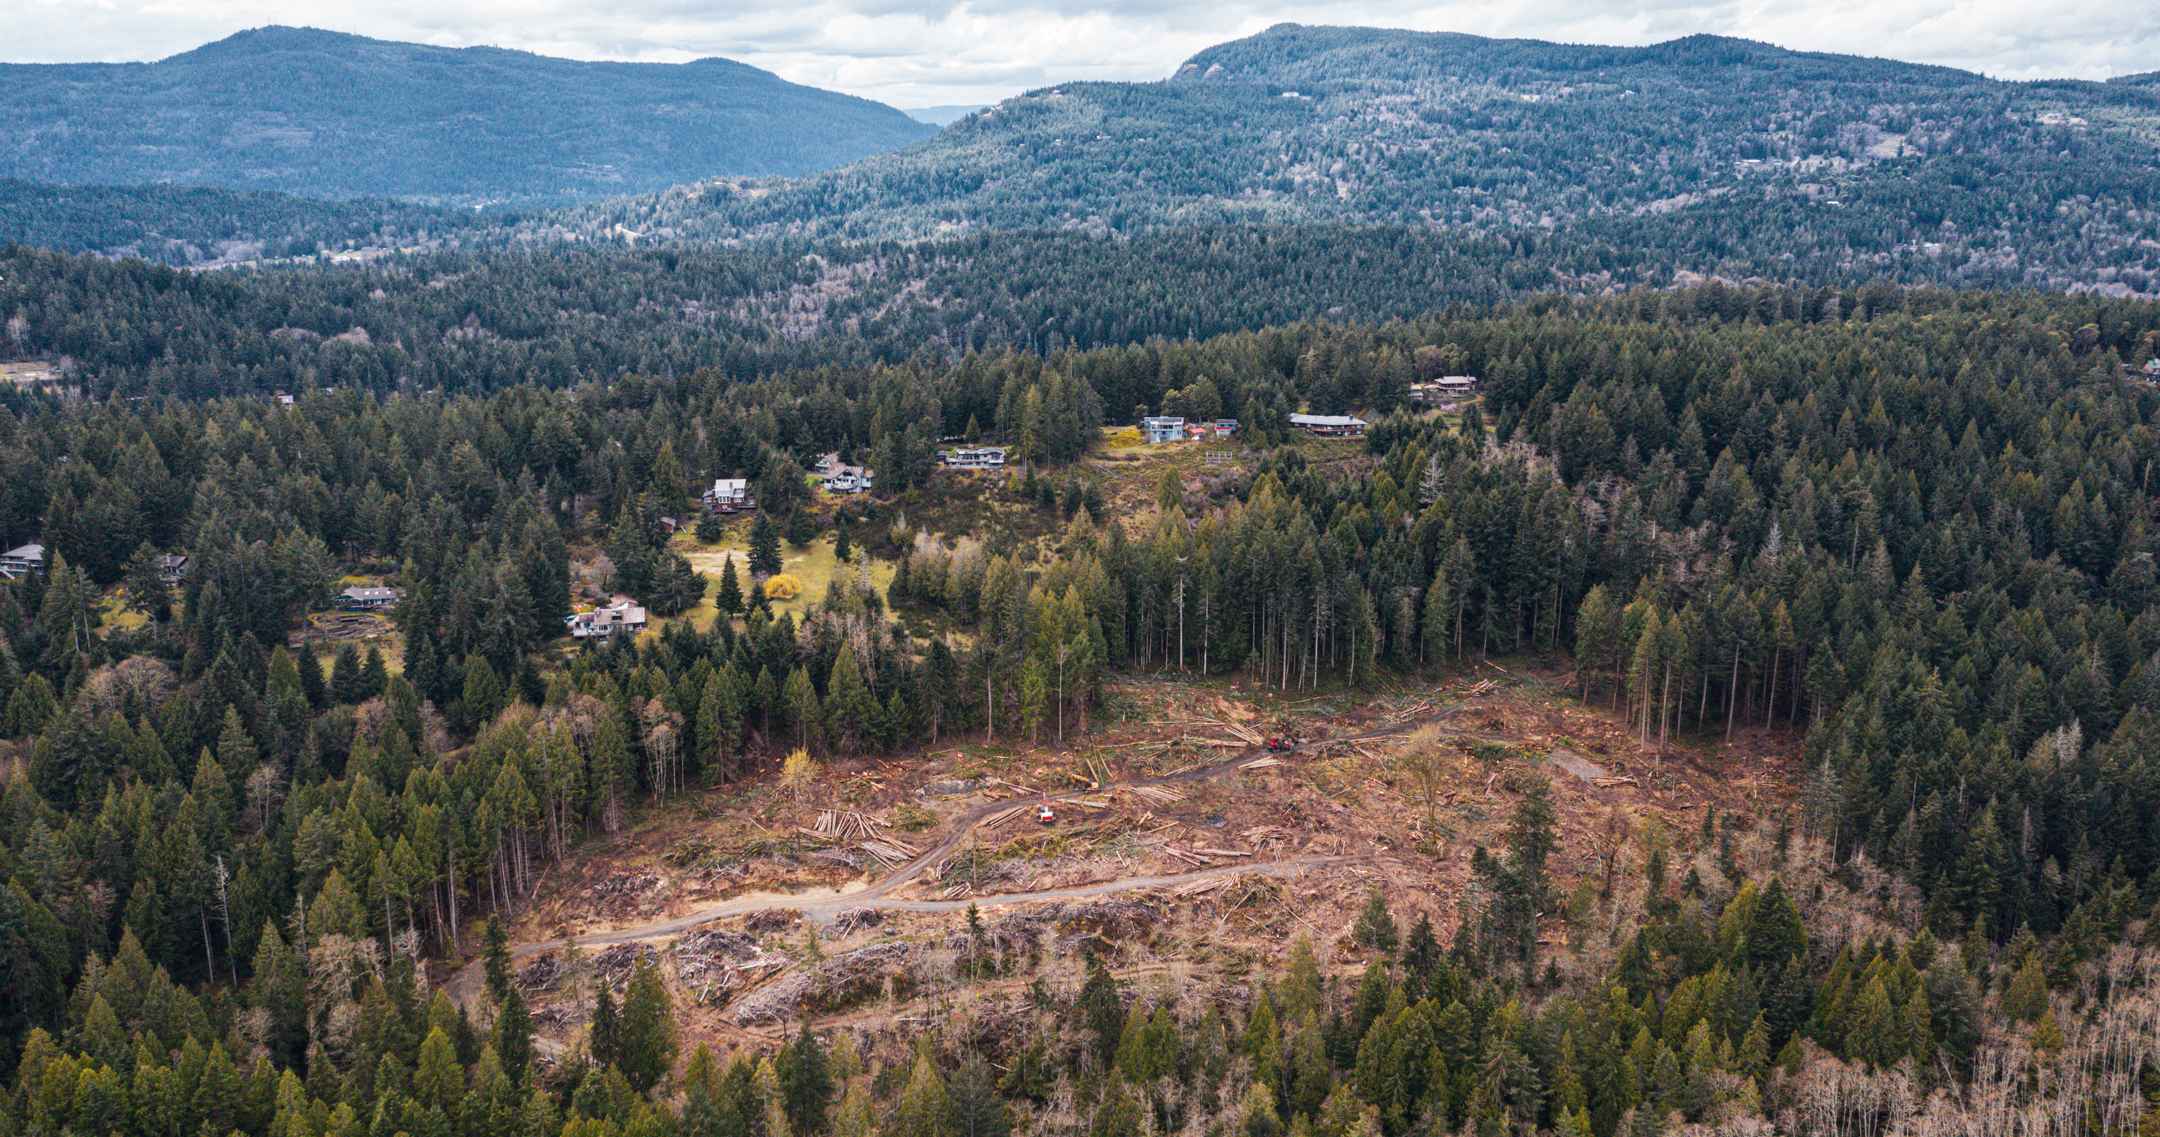 An aerial view of a clearcut area with mountains in the background.